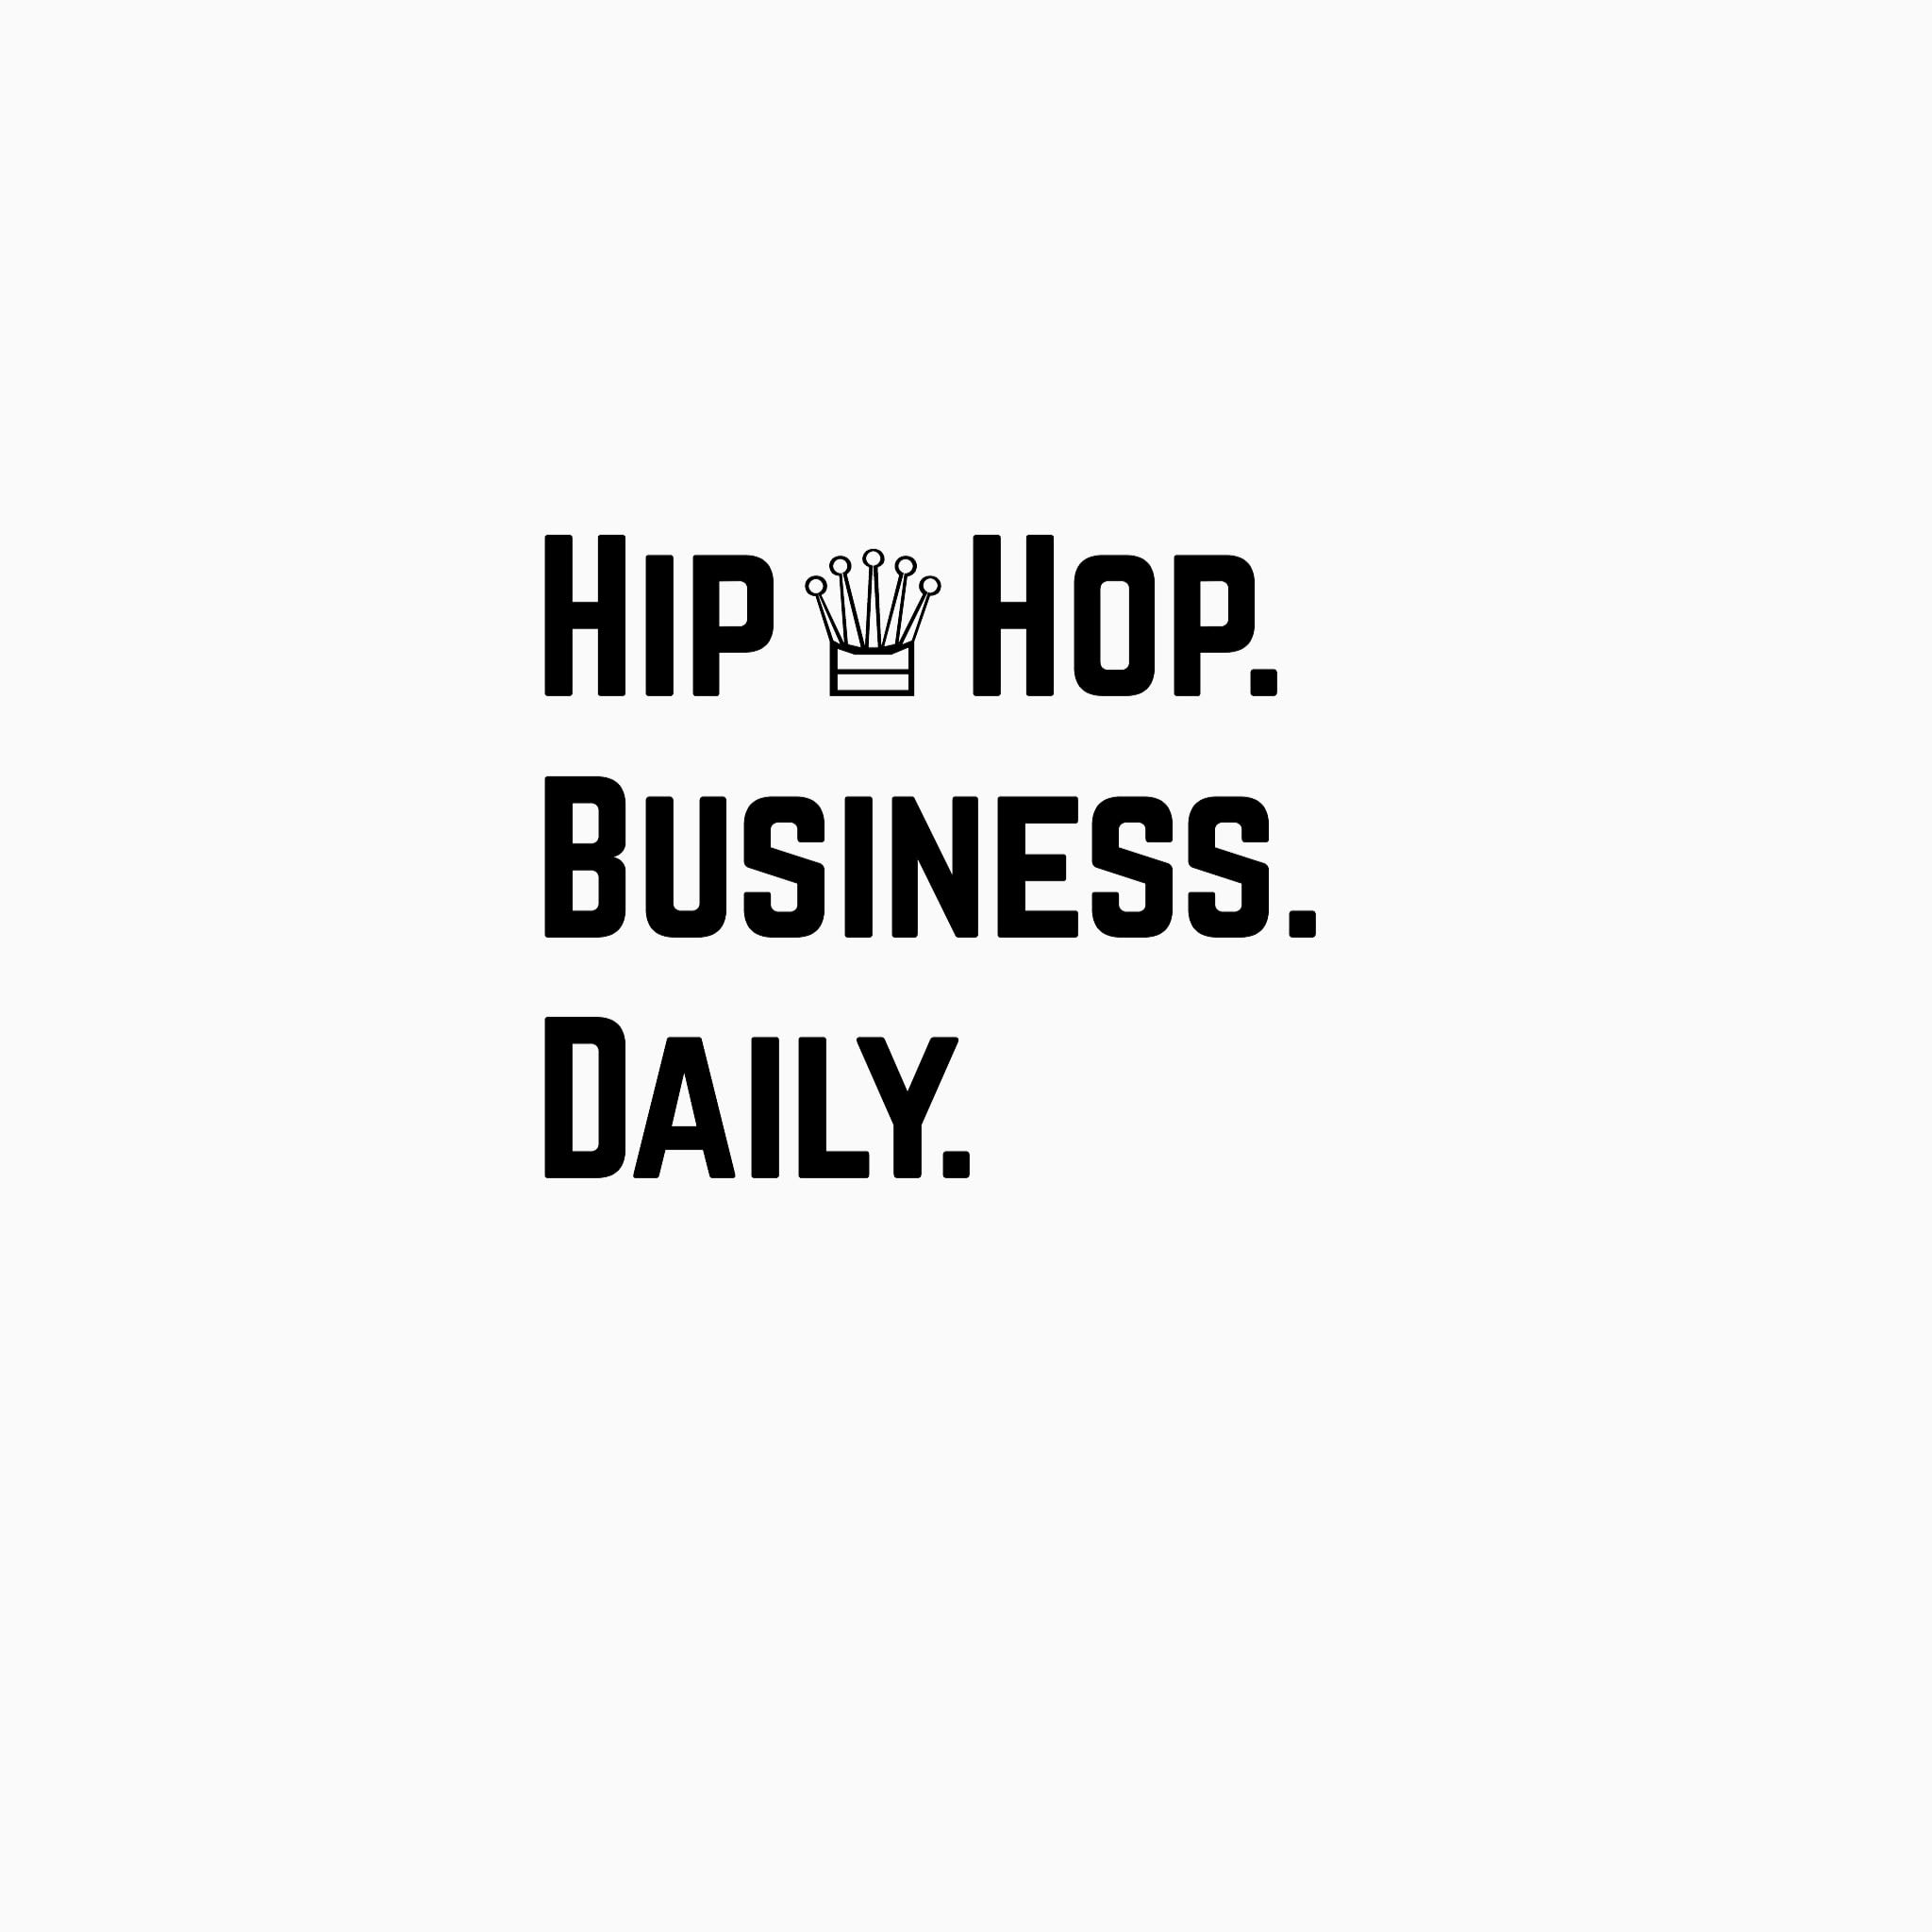 Hiphop Business Daily